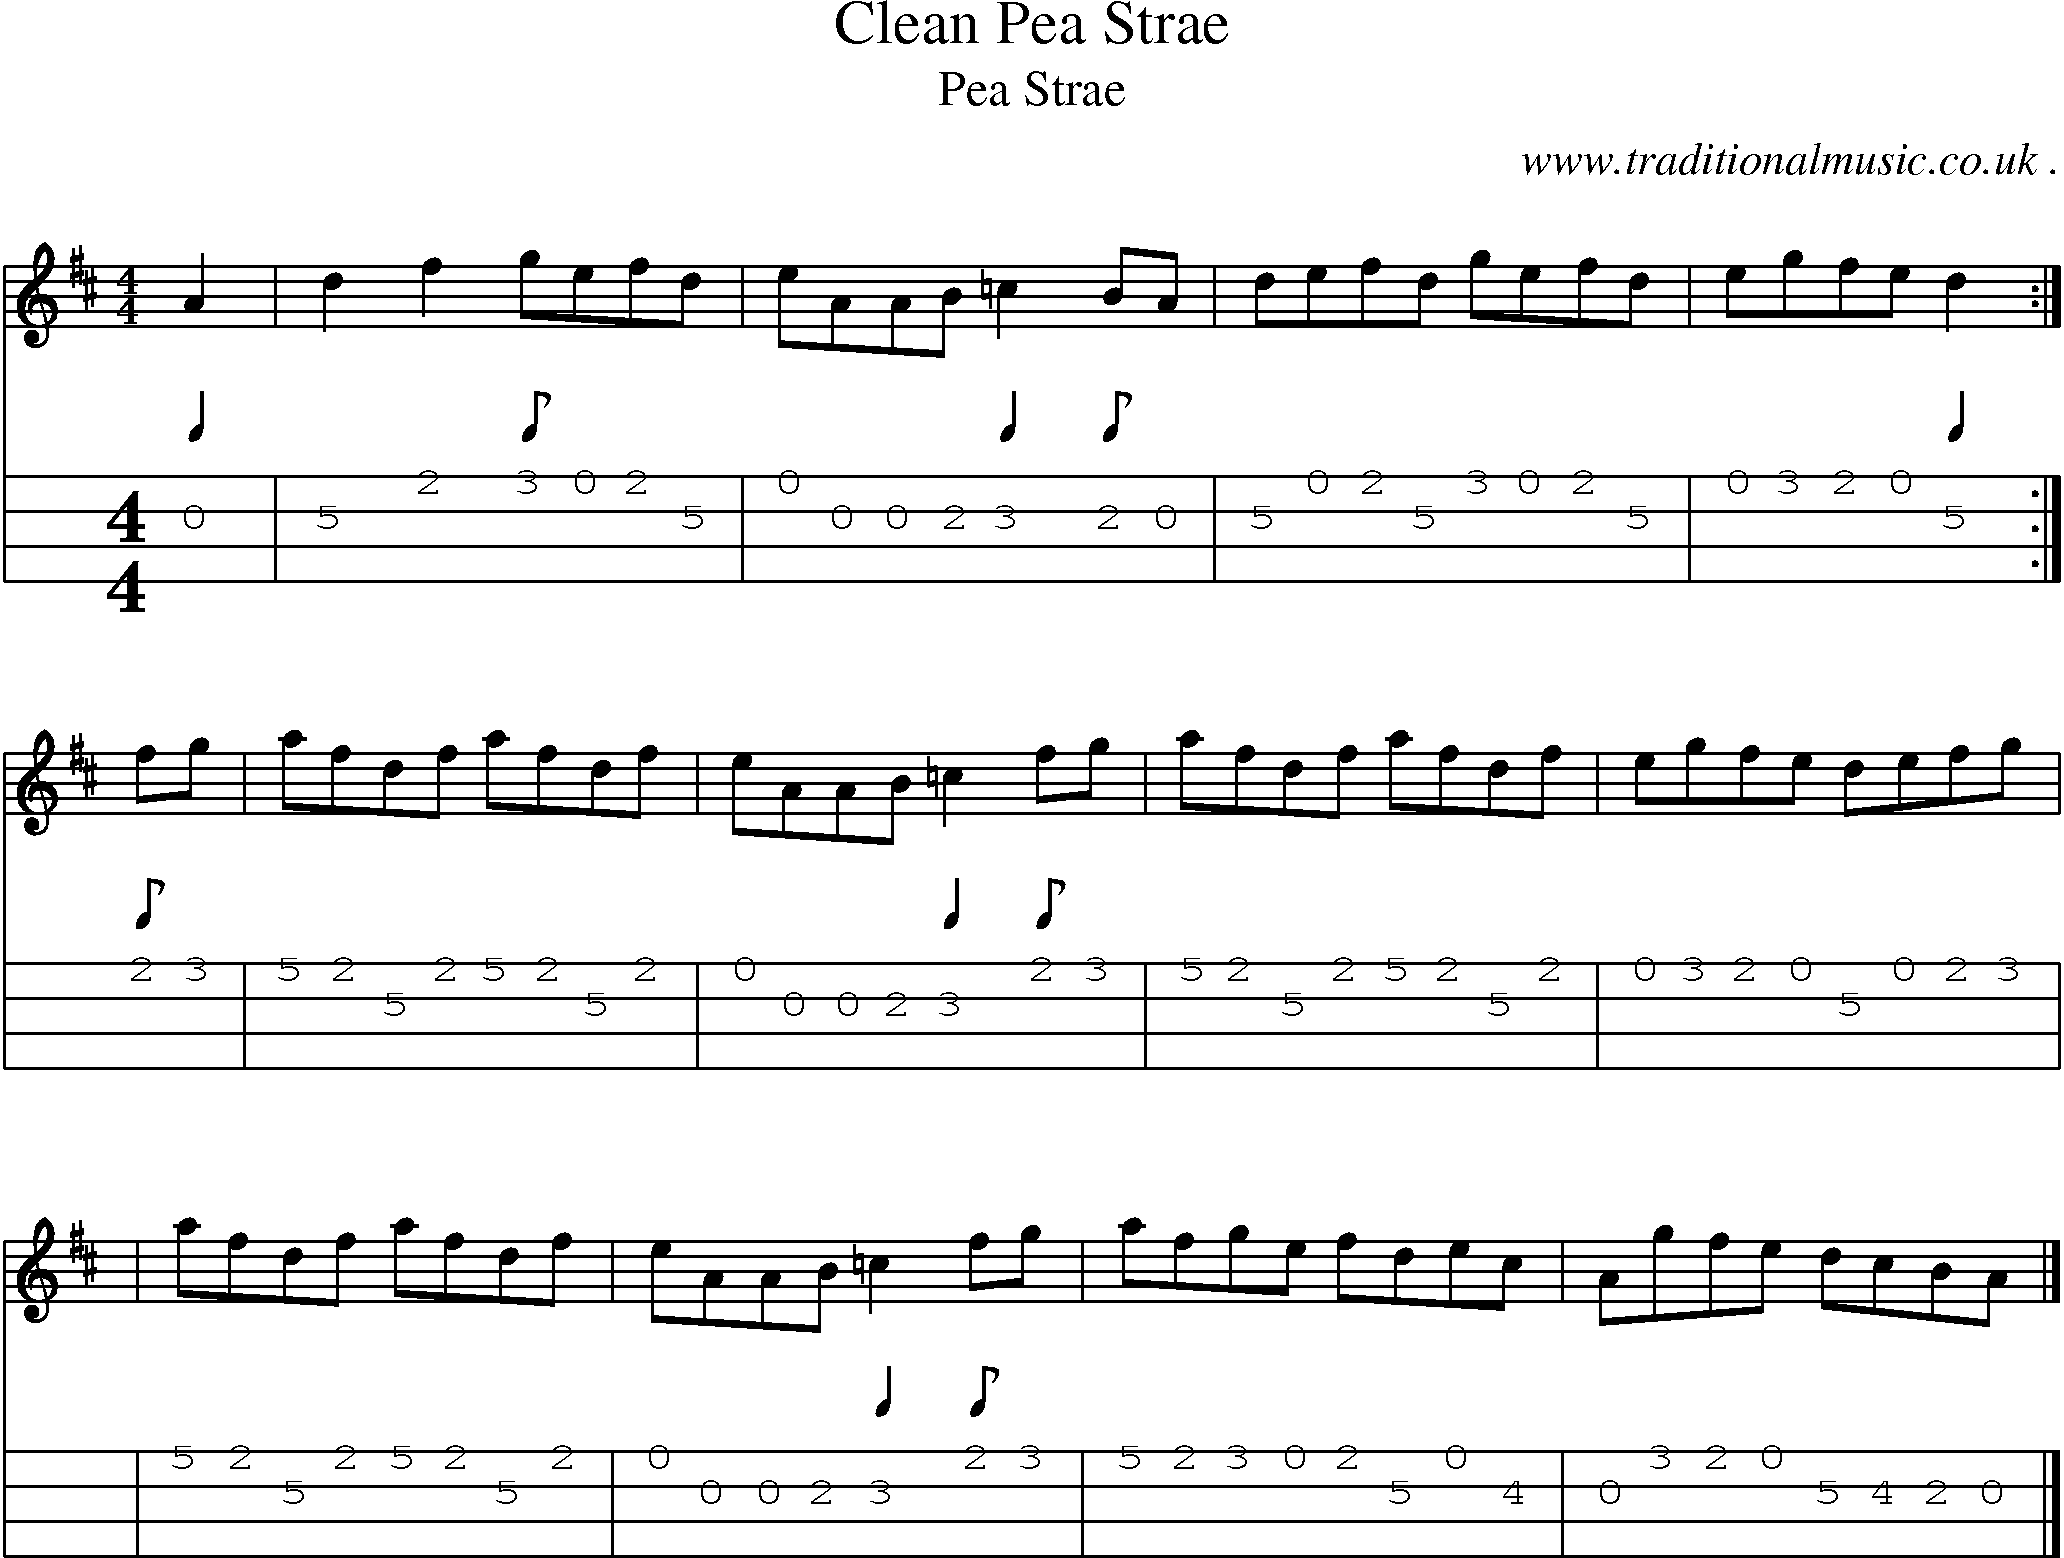 Sheet-music  score, Chords and Mandolin Tabs for Clean Pea Strae